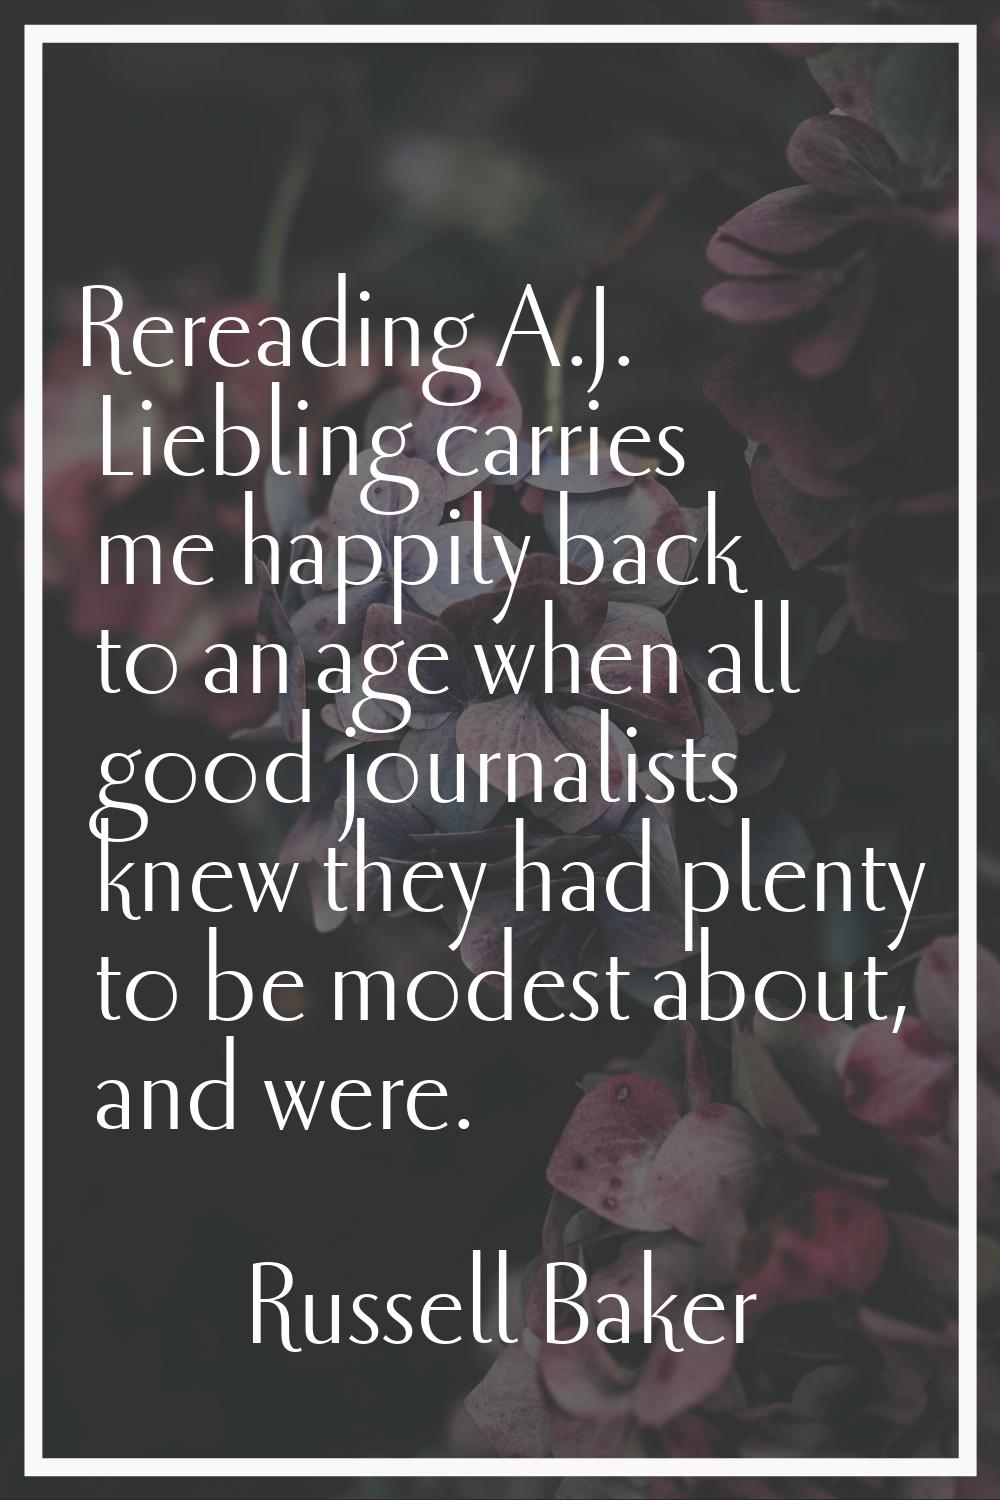 Rereading A.J. Liebling carries me happily back to an age when all good journalists knew they had p